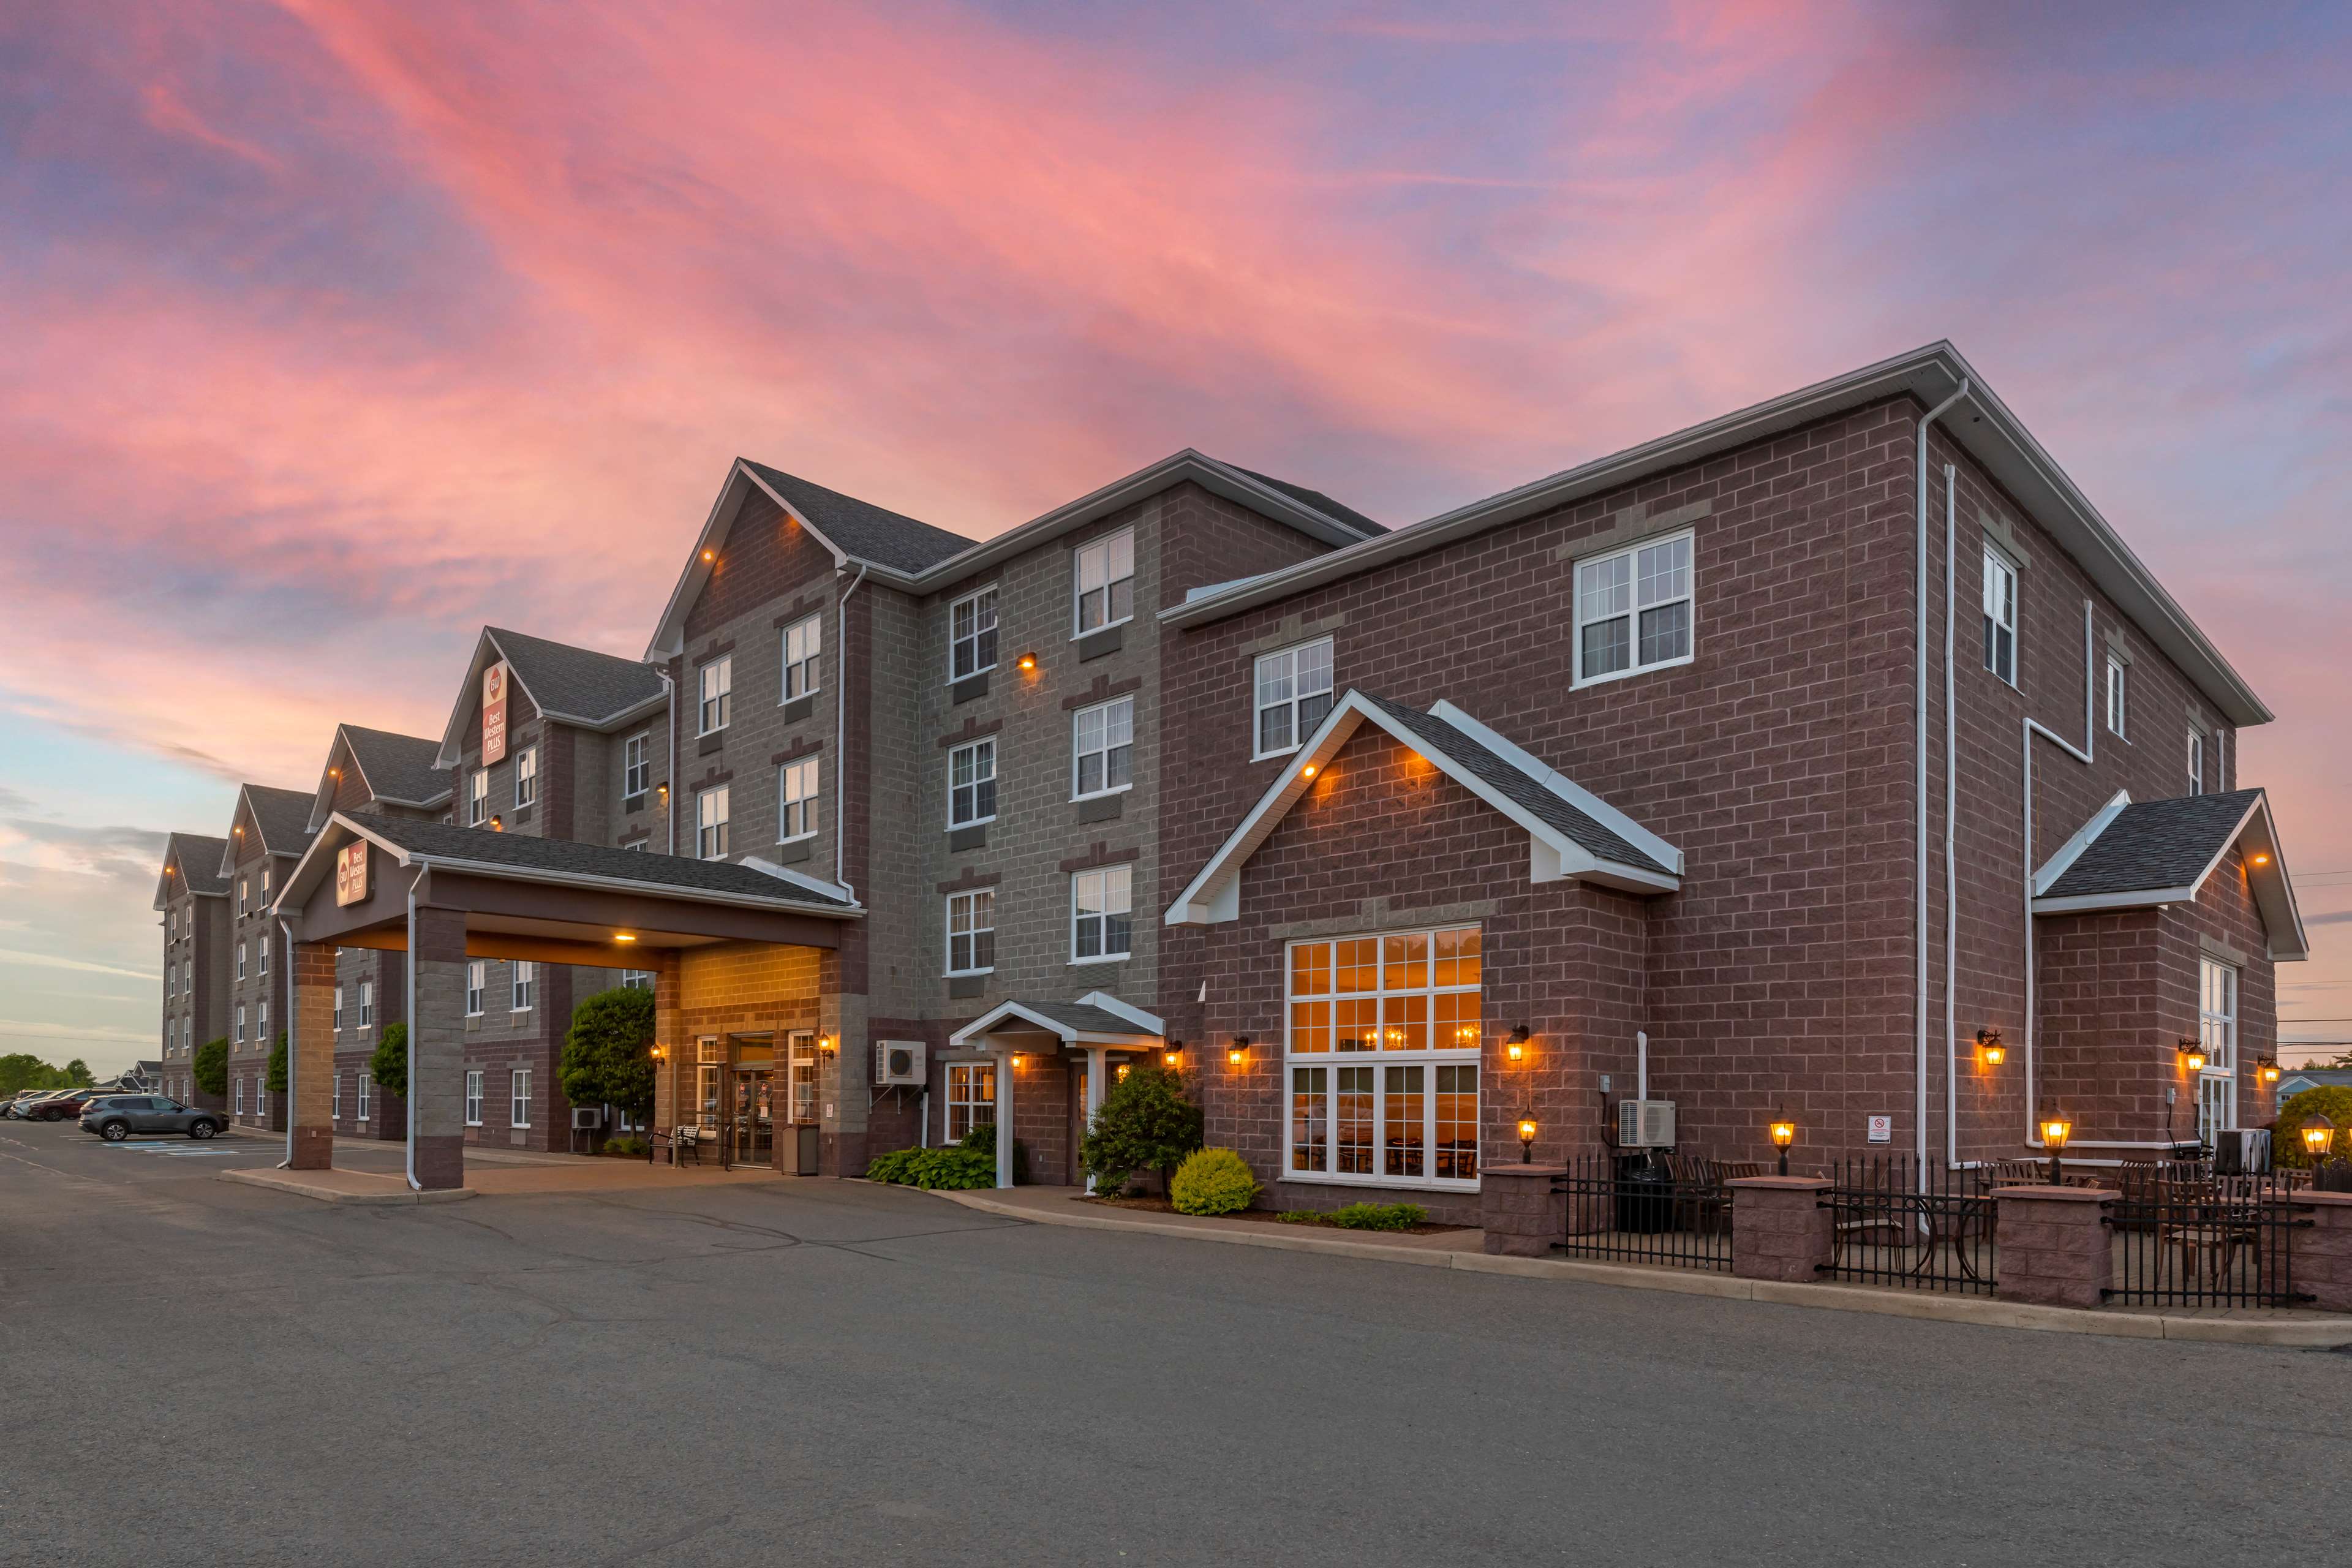 Images Best Western Plus Fredericton Hotel & Suites